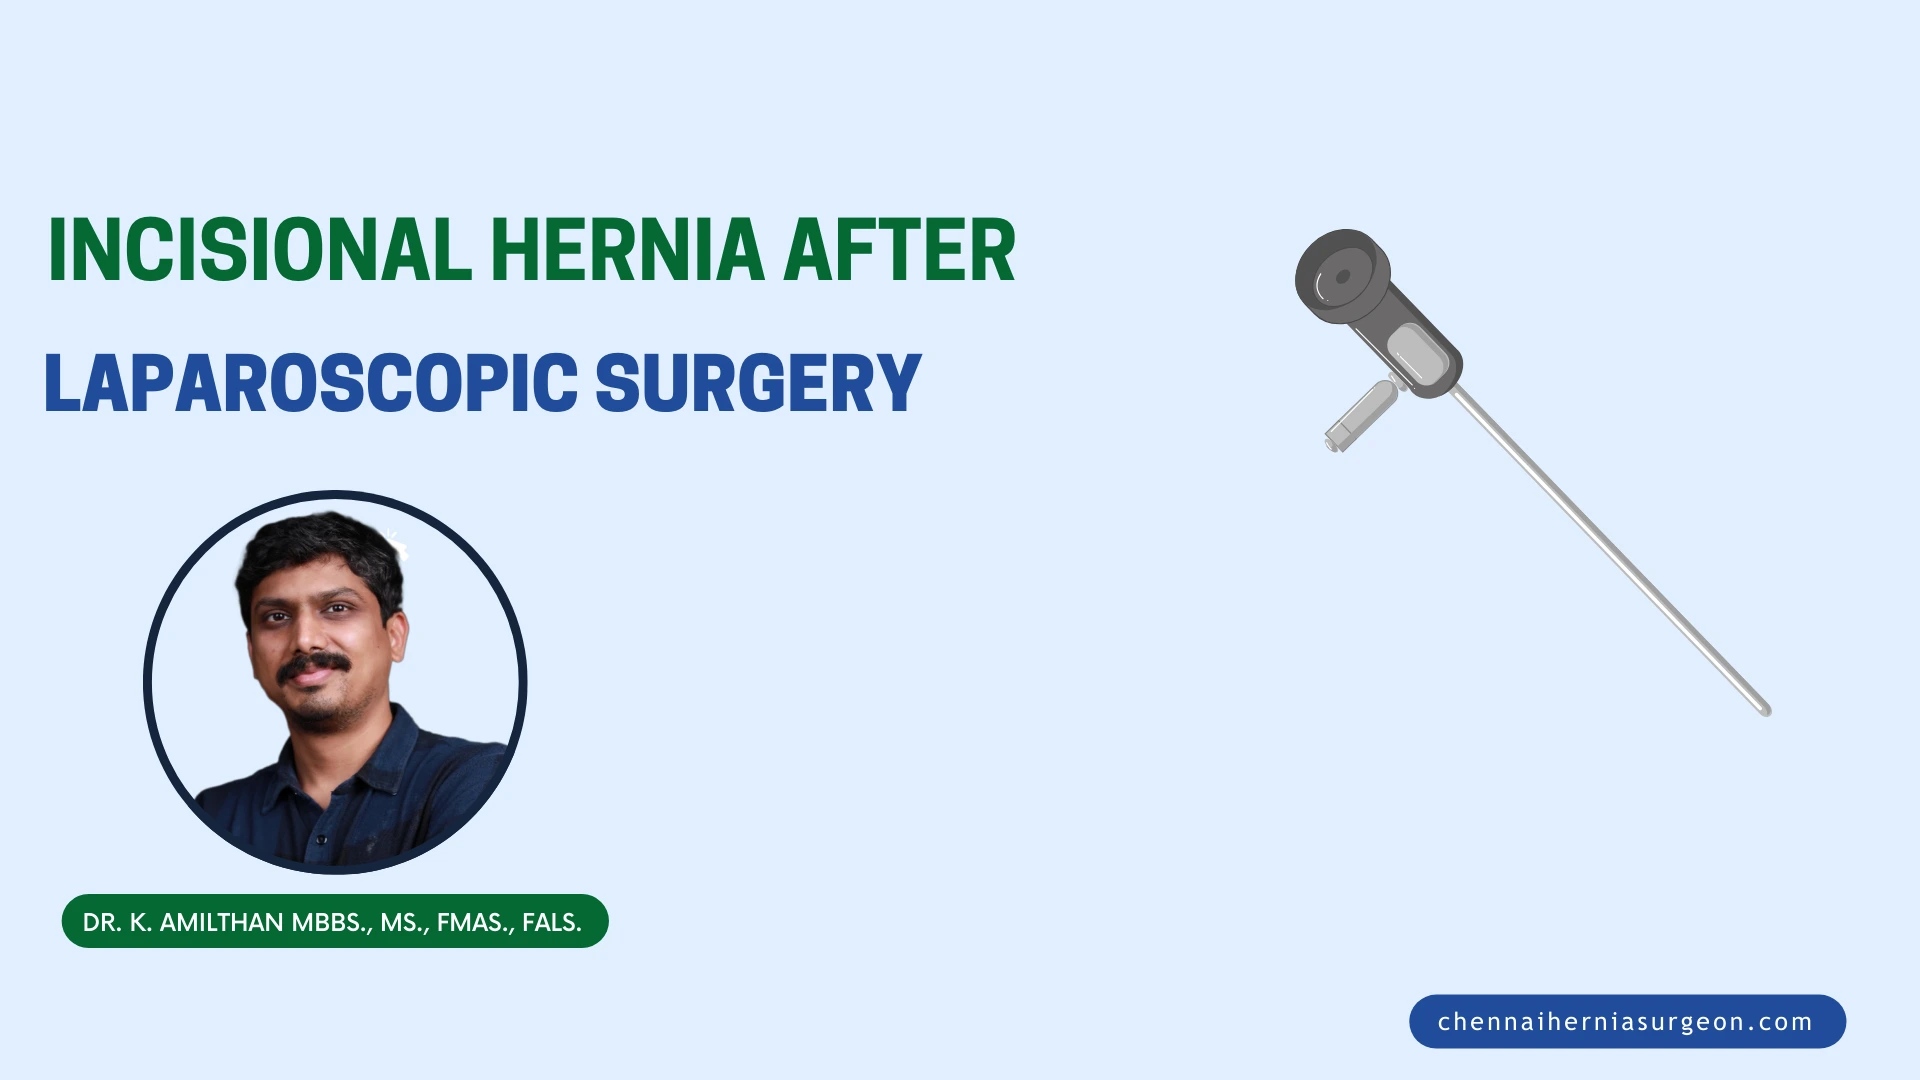 Incisional Hernia After Laparoscopic Surgery